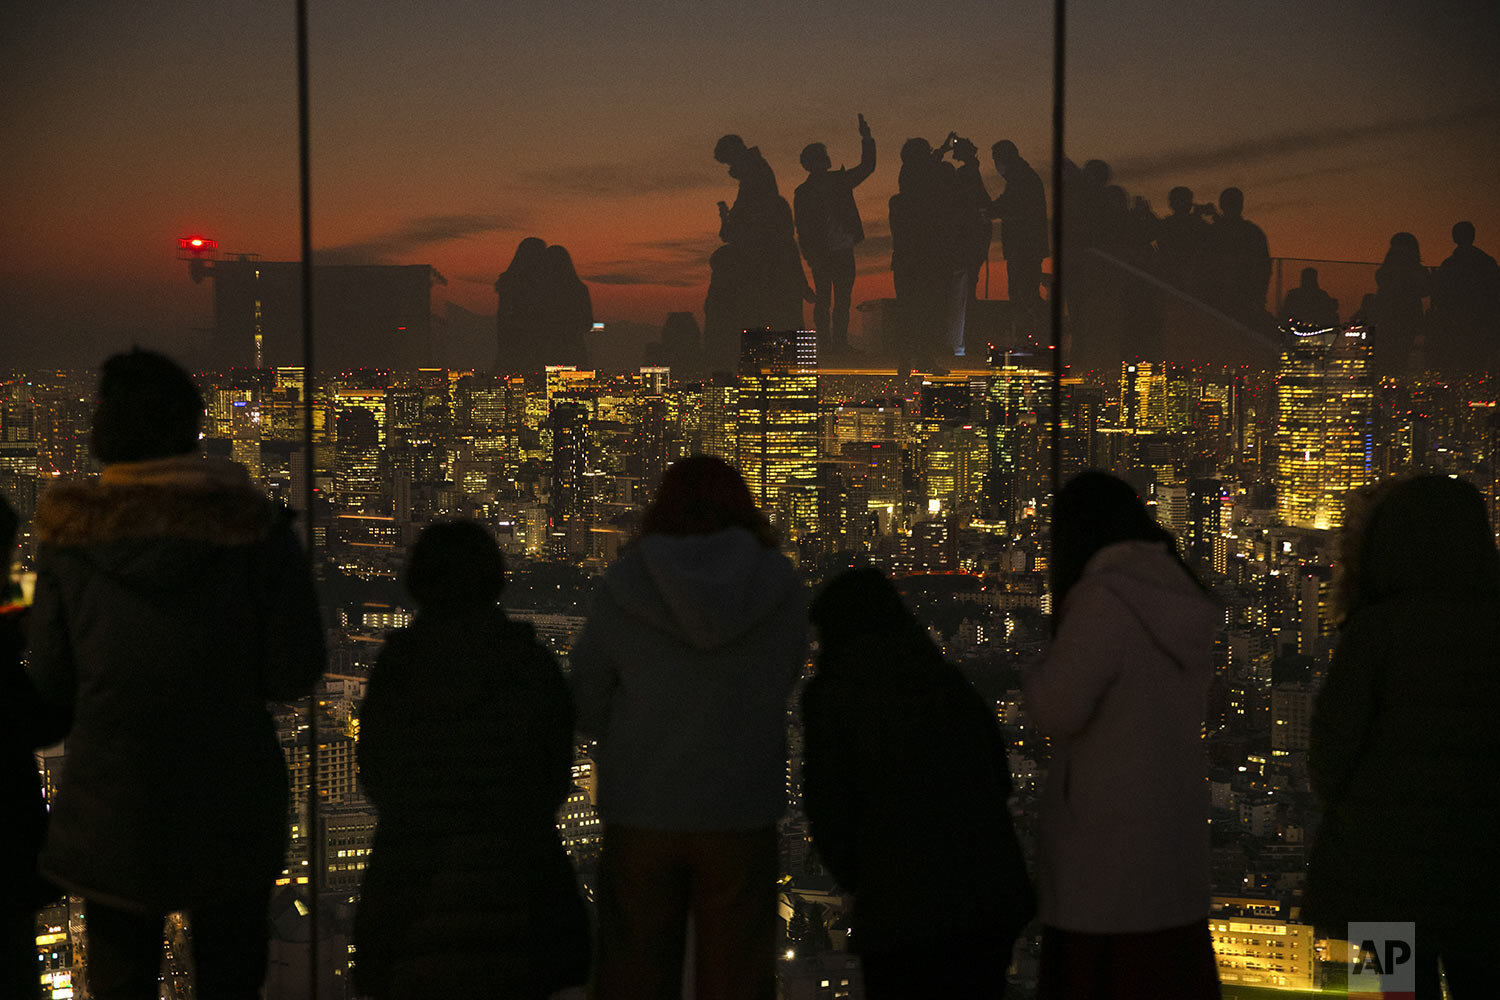  Silhouetted against sunset, visitors are reflected on the glass walls of Shibuya Sky observation deck Monday, Jan. 20, 2020, in Tokyo.  (AP Photo/Jae C. Hong) 